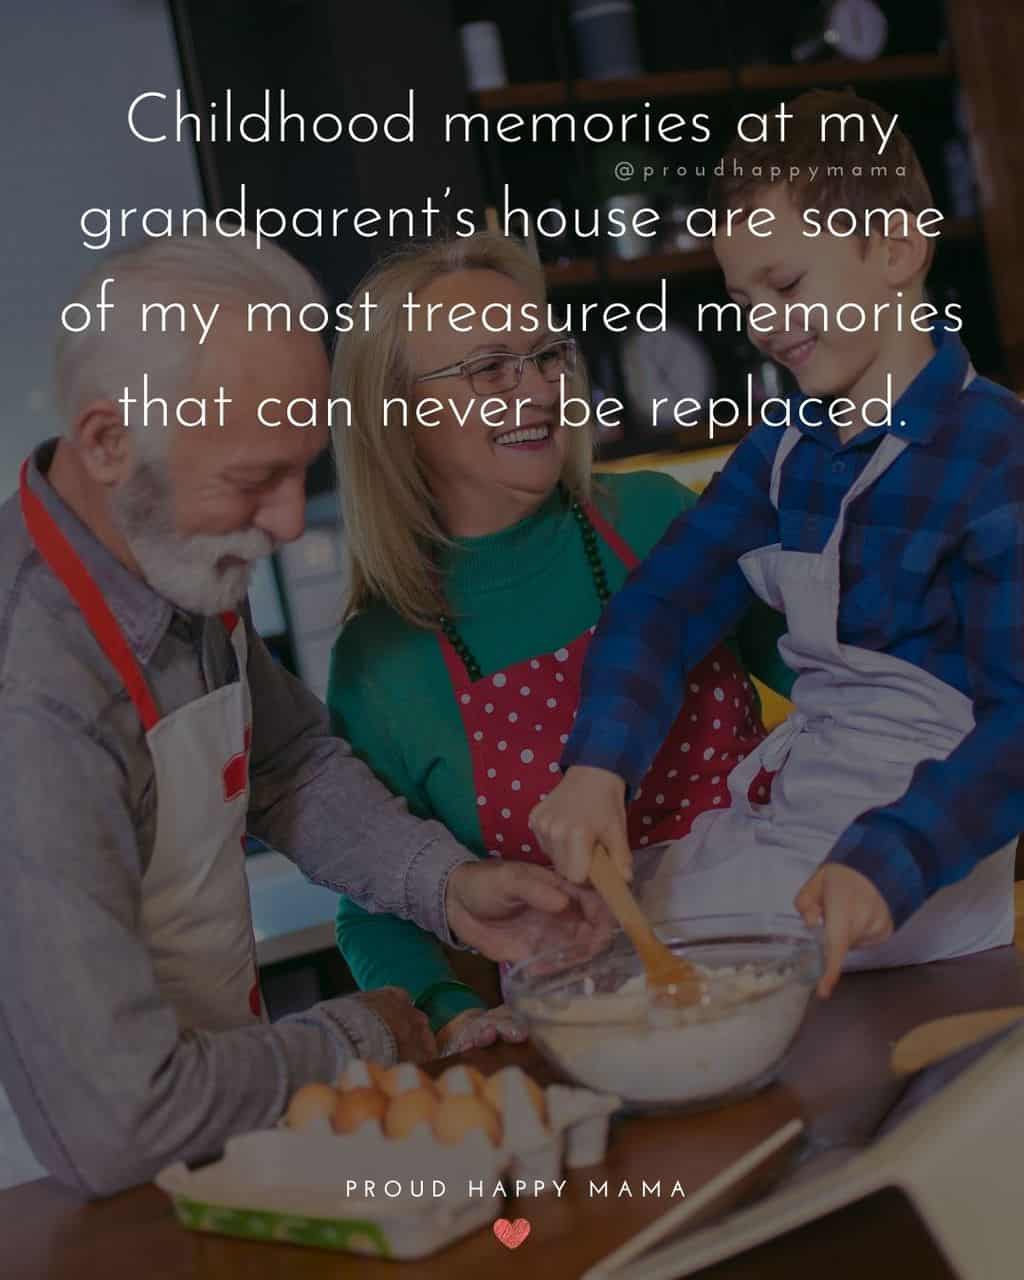 Grandparent Quotes – Childhood memories at my grandparent’s house are some of my most treasured memories that can never